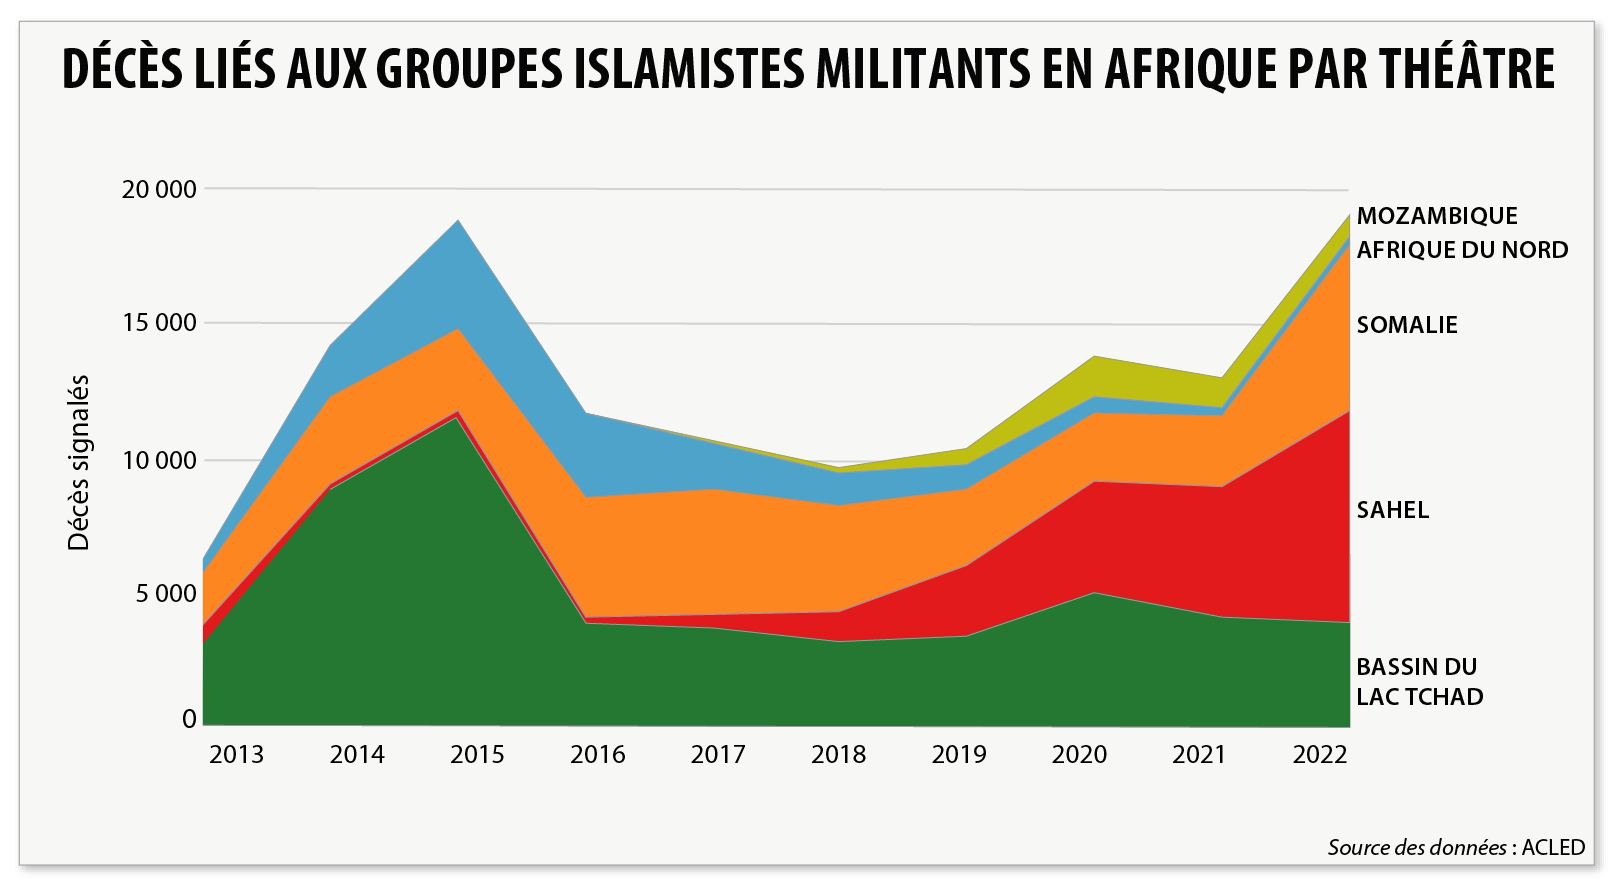 Fatalities linked to militant Islamist groups in Africa by theater